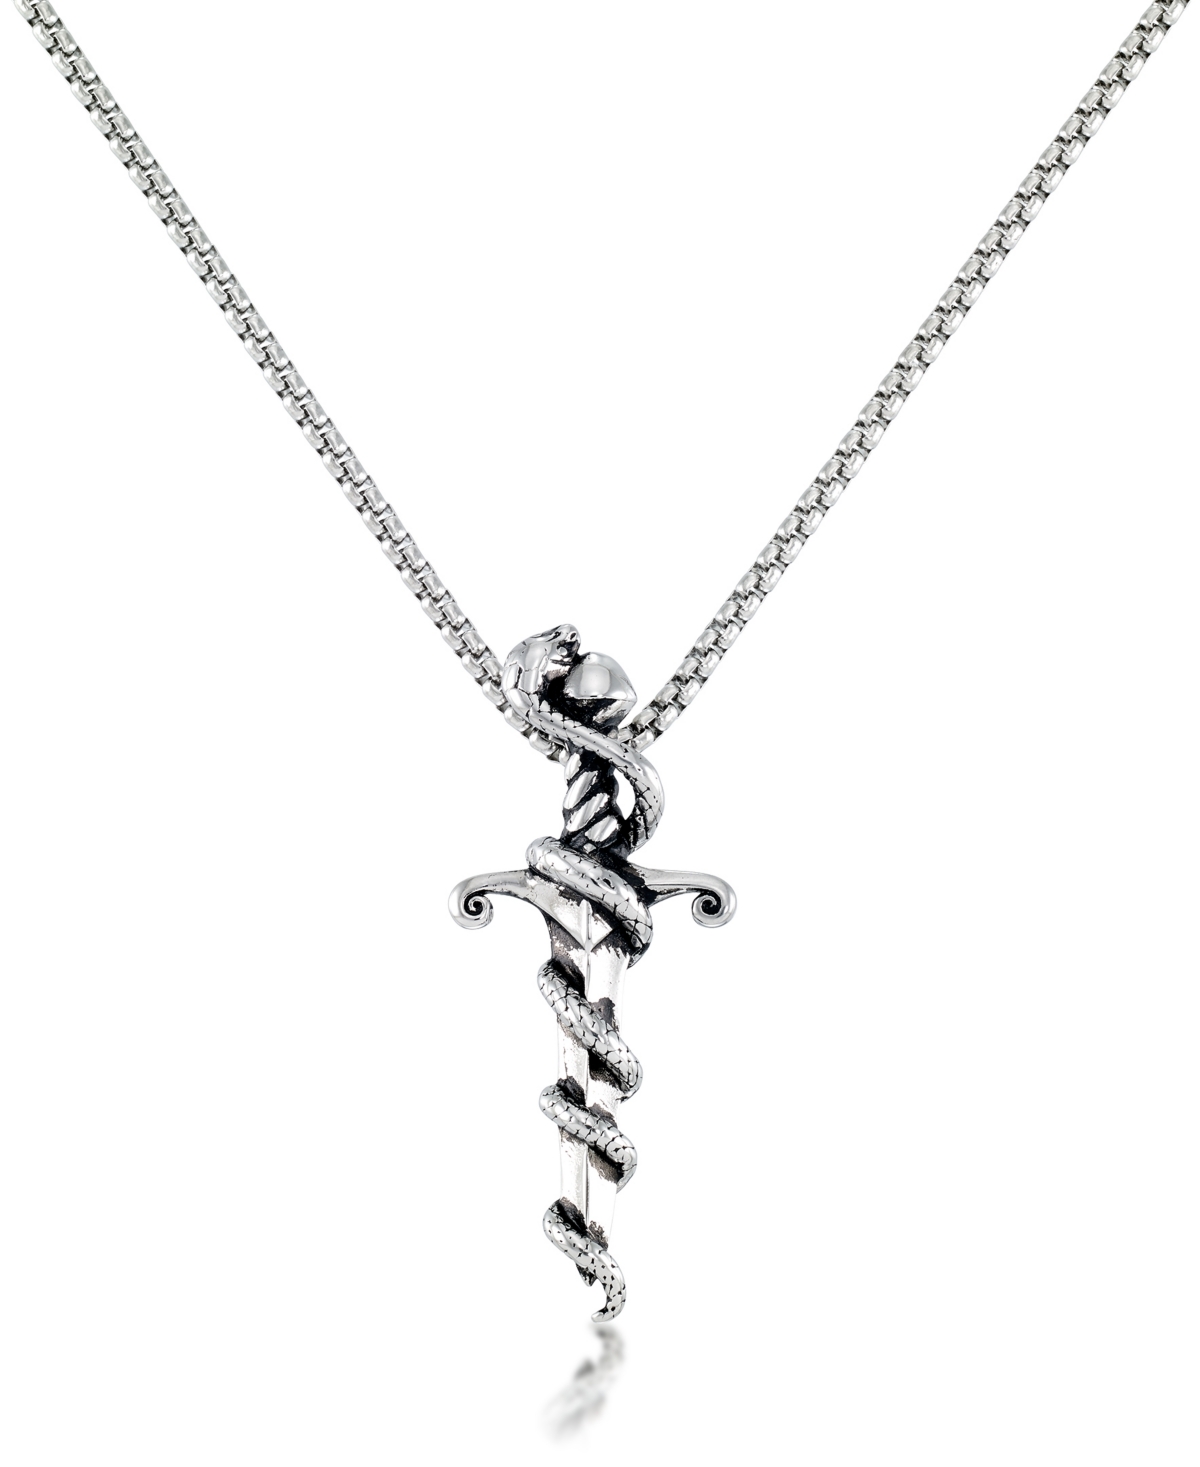 Men's Serpent 24" Pendant Necklace in Stainless Steel - Stainless Steel